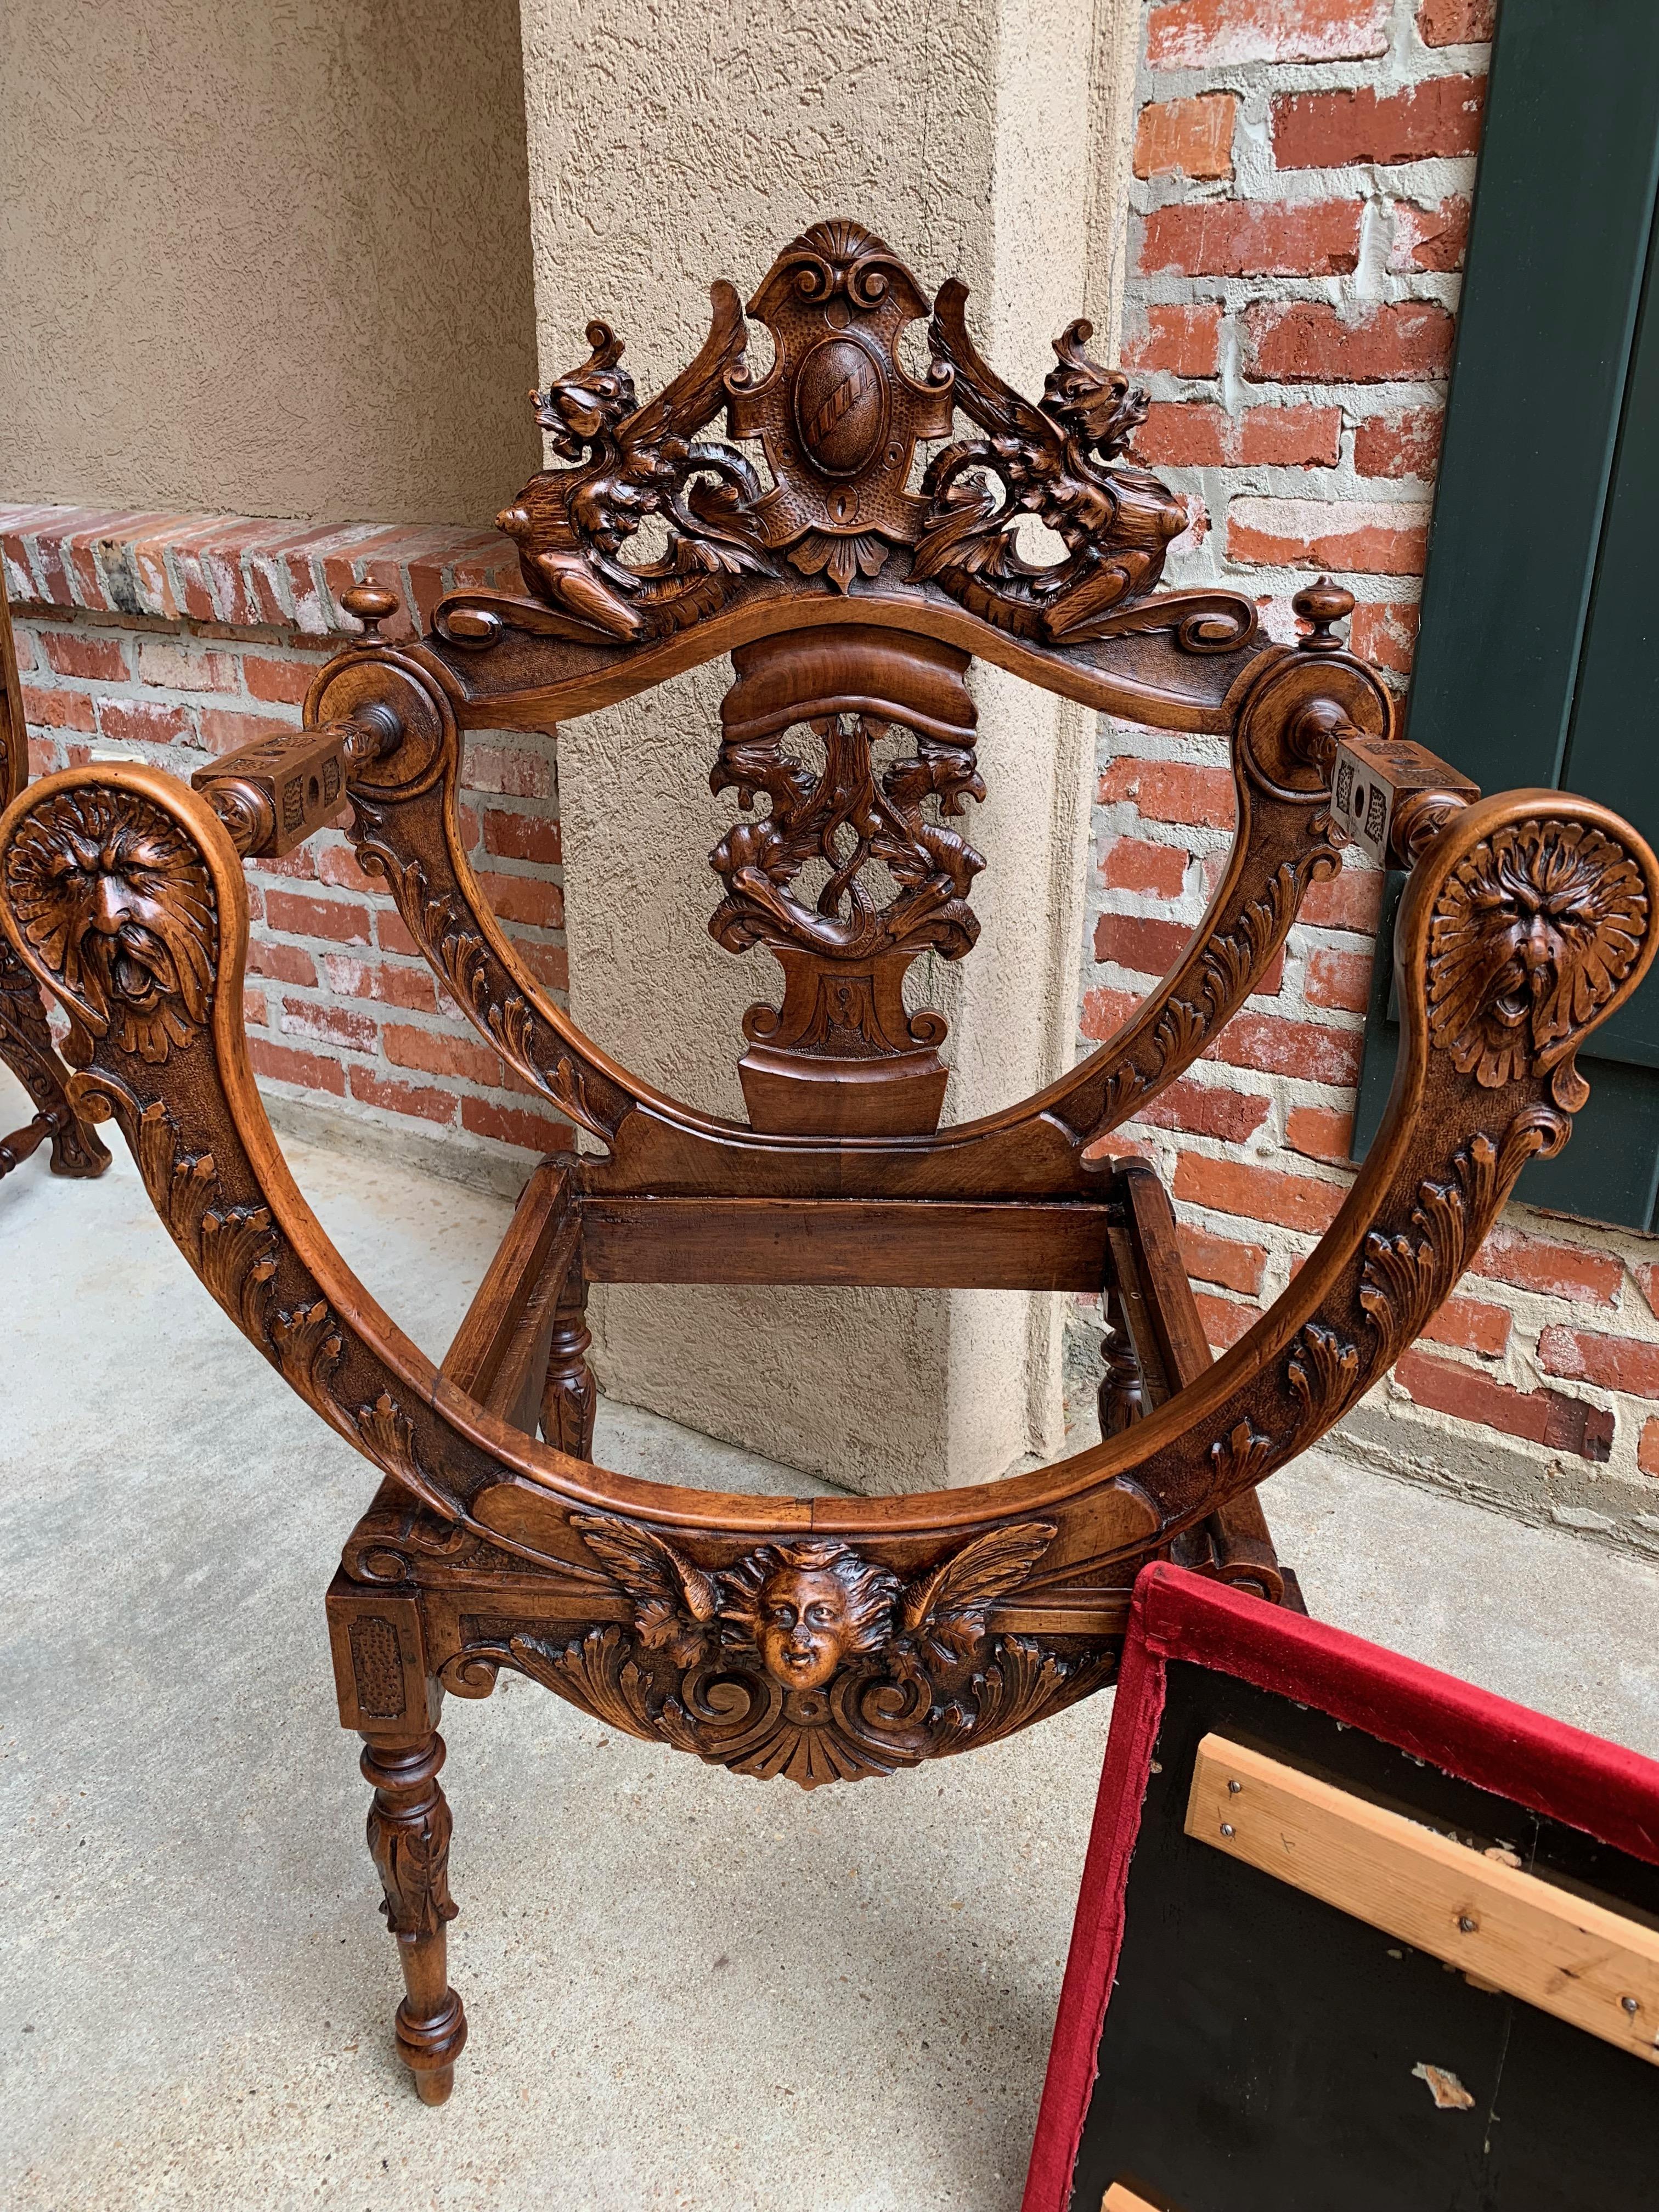 Mid-19th Century 19th Century Antique French Carved Wood Dagobert Chair Curule Renaissance Throne